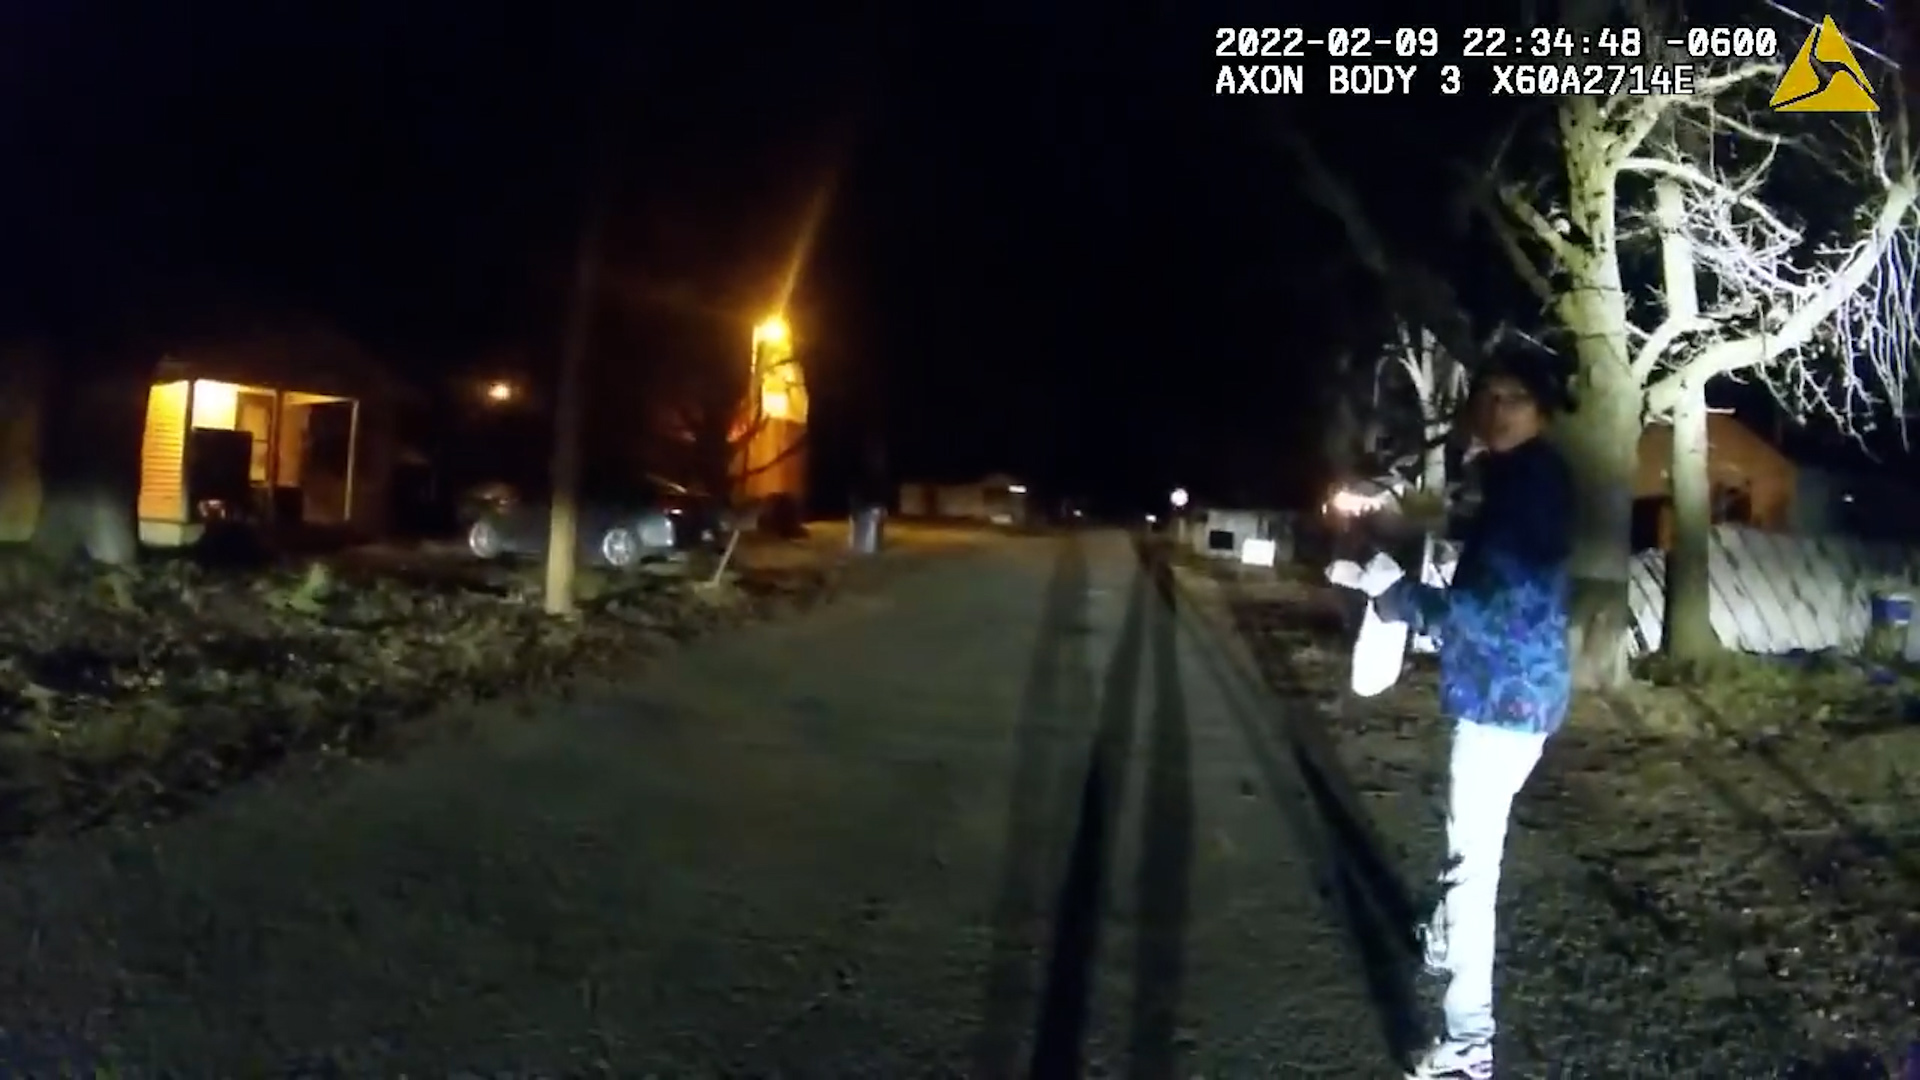 Warning: Graphic content and violence. Jonesboro police have released the bodycam footage in the fatal shooting of 22-year-old Jayden Prunty.